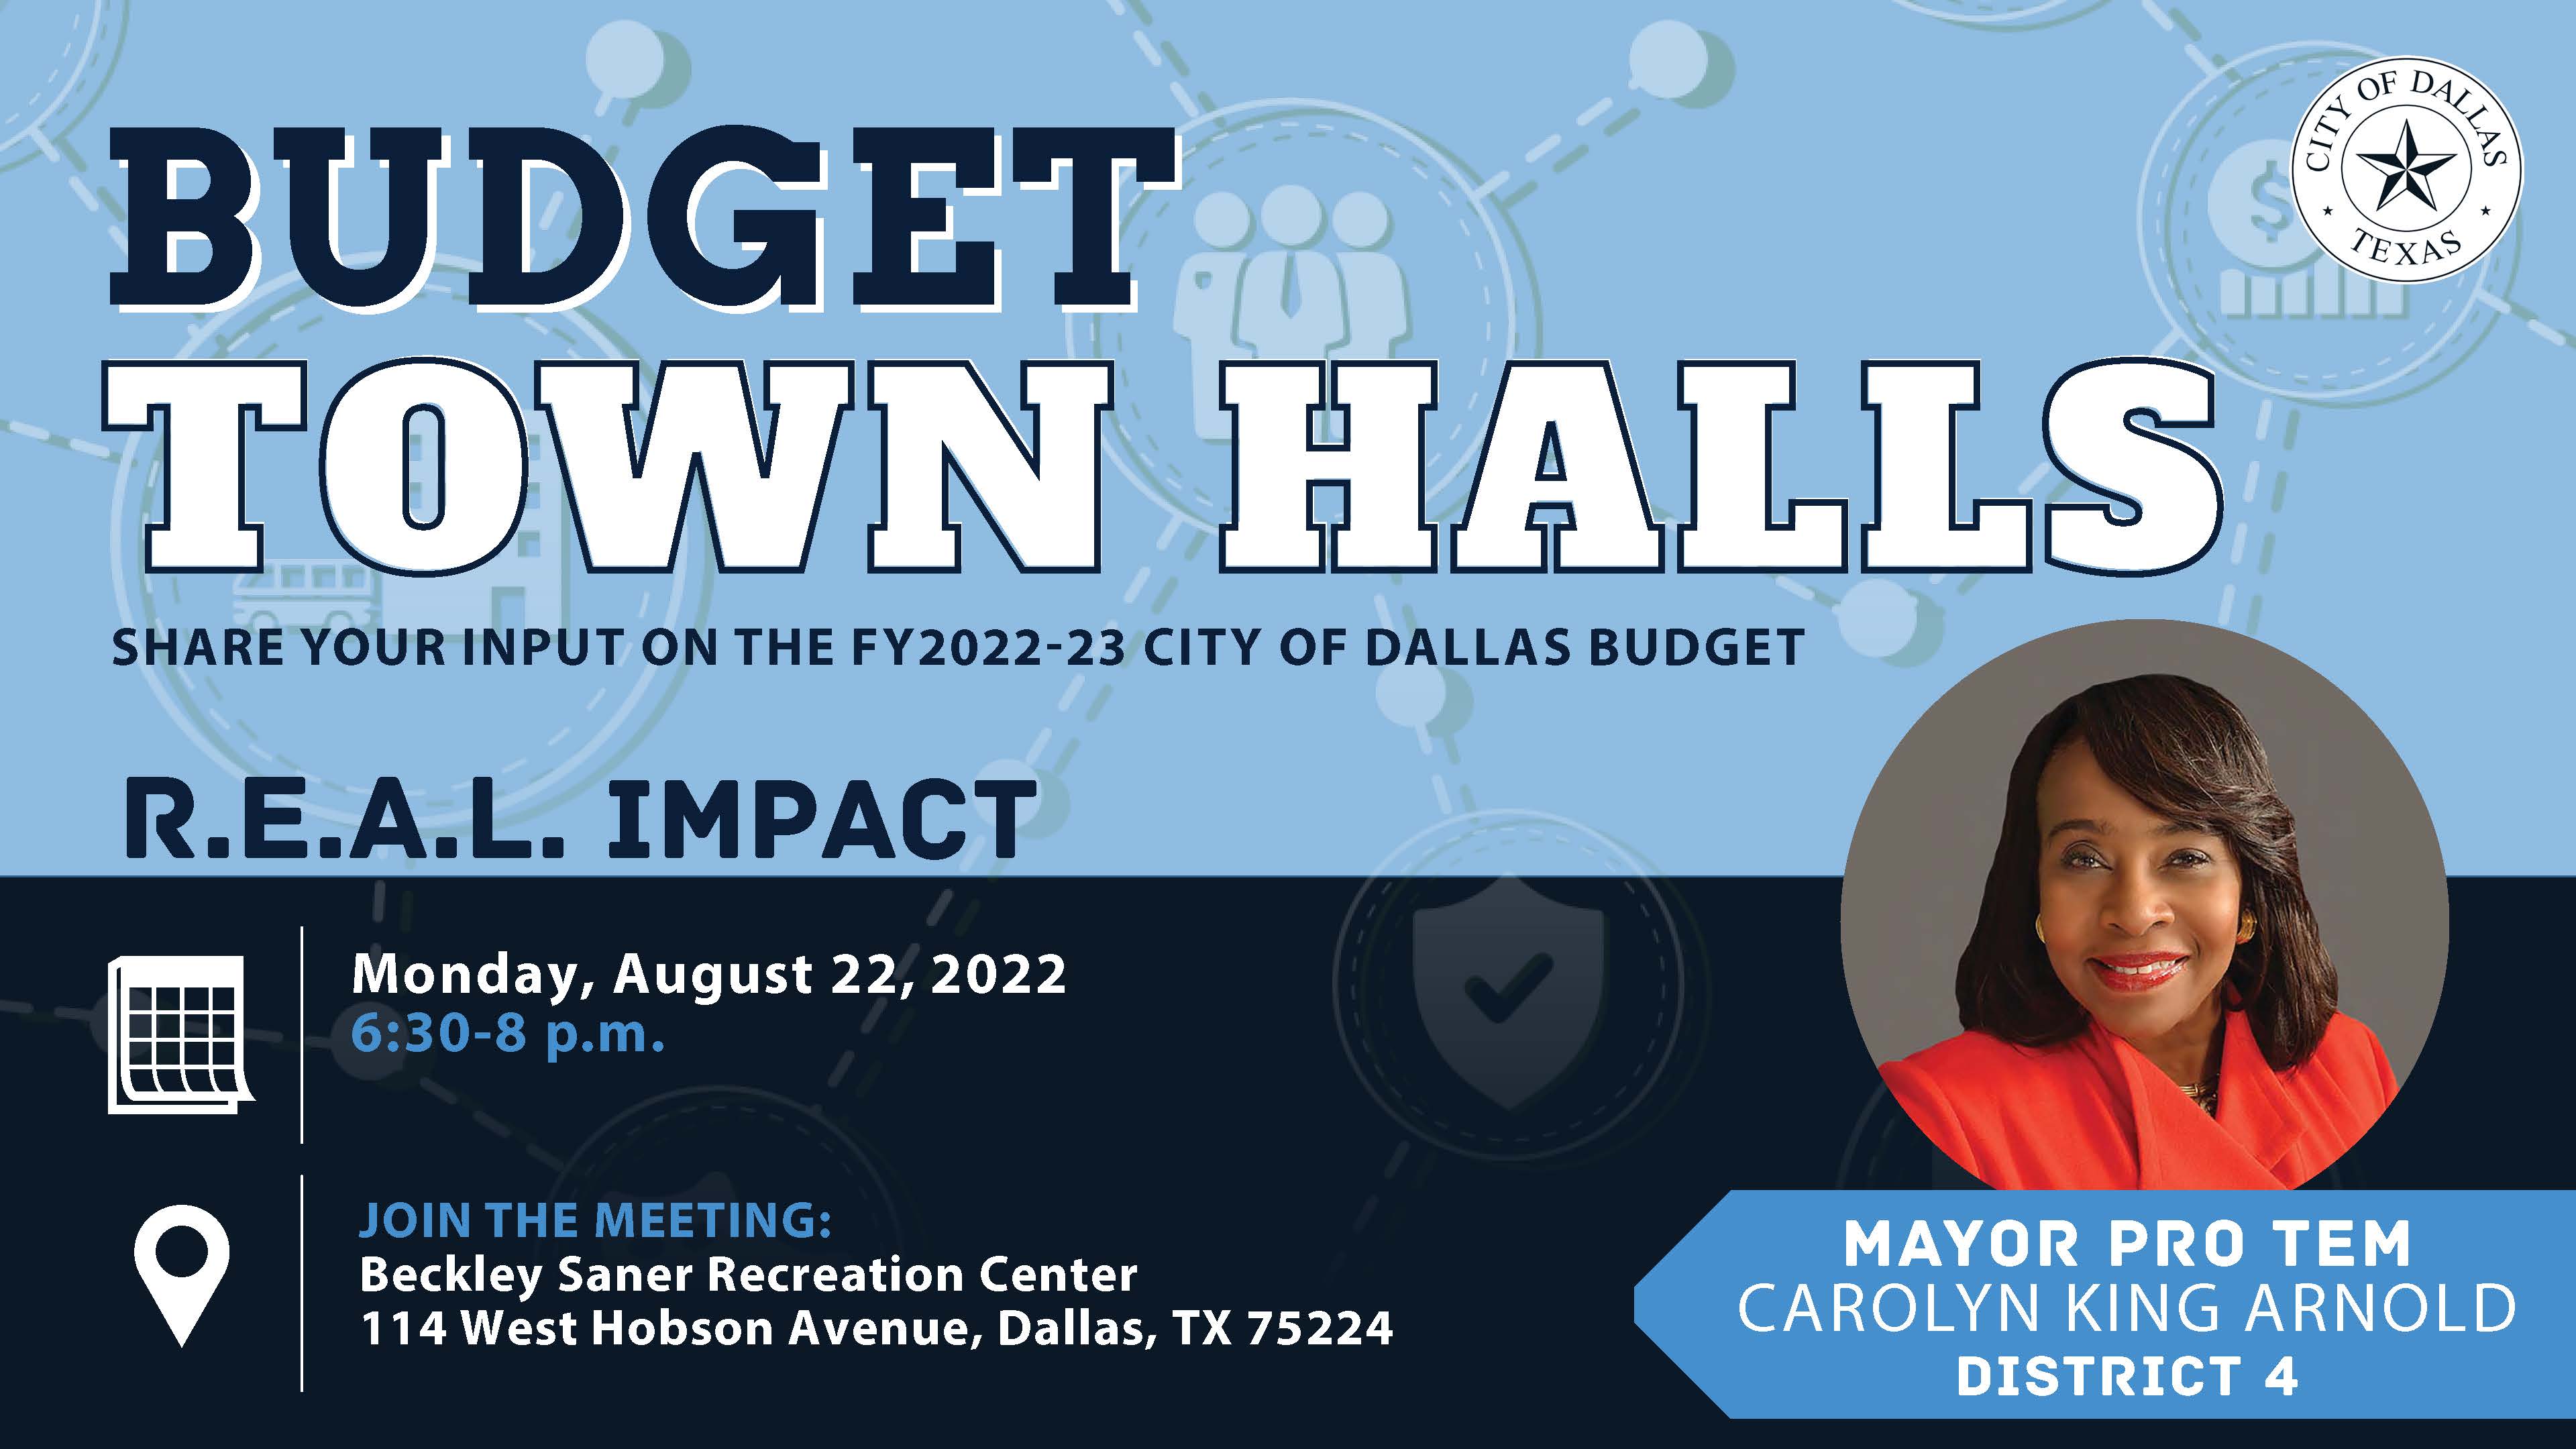 Budget Town Hall Meeting Flyer - District 4, 8.22.22.jpg